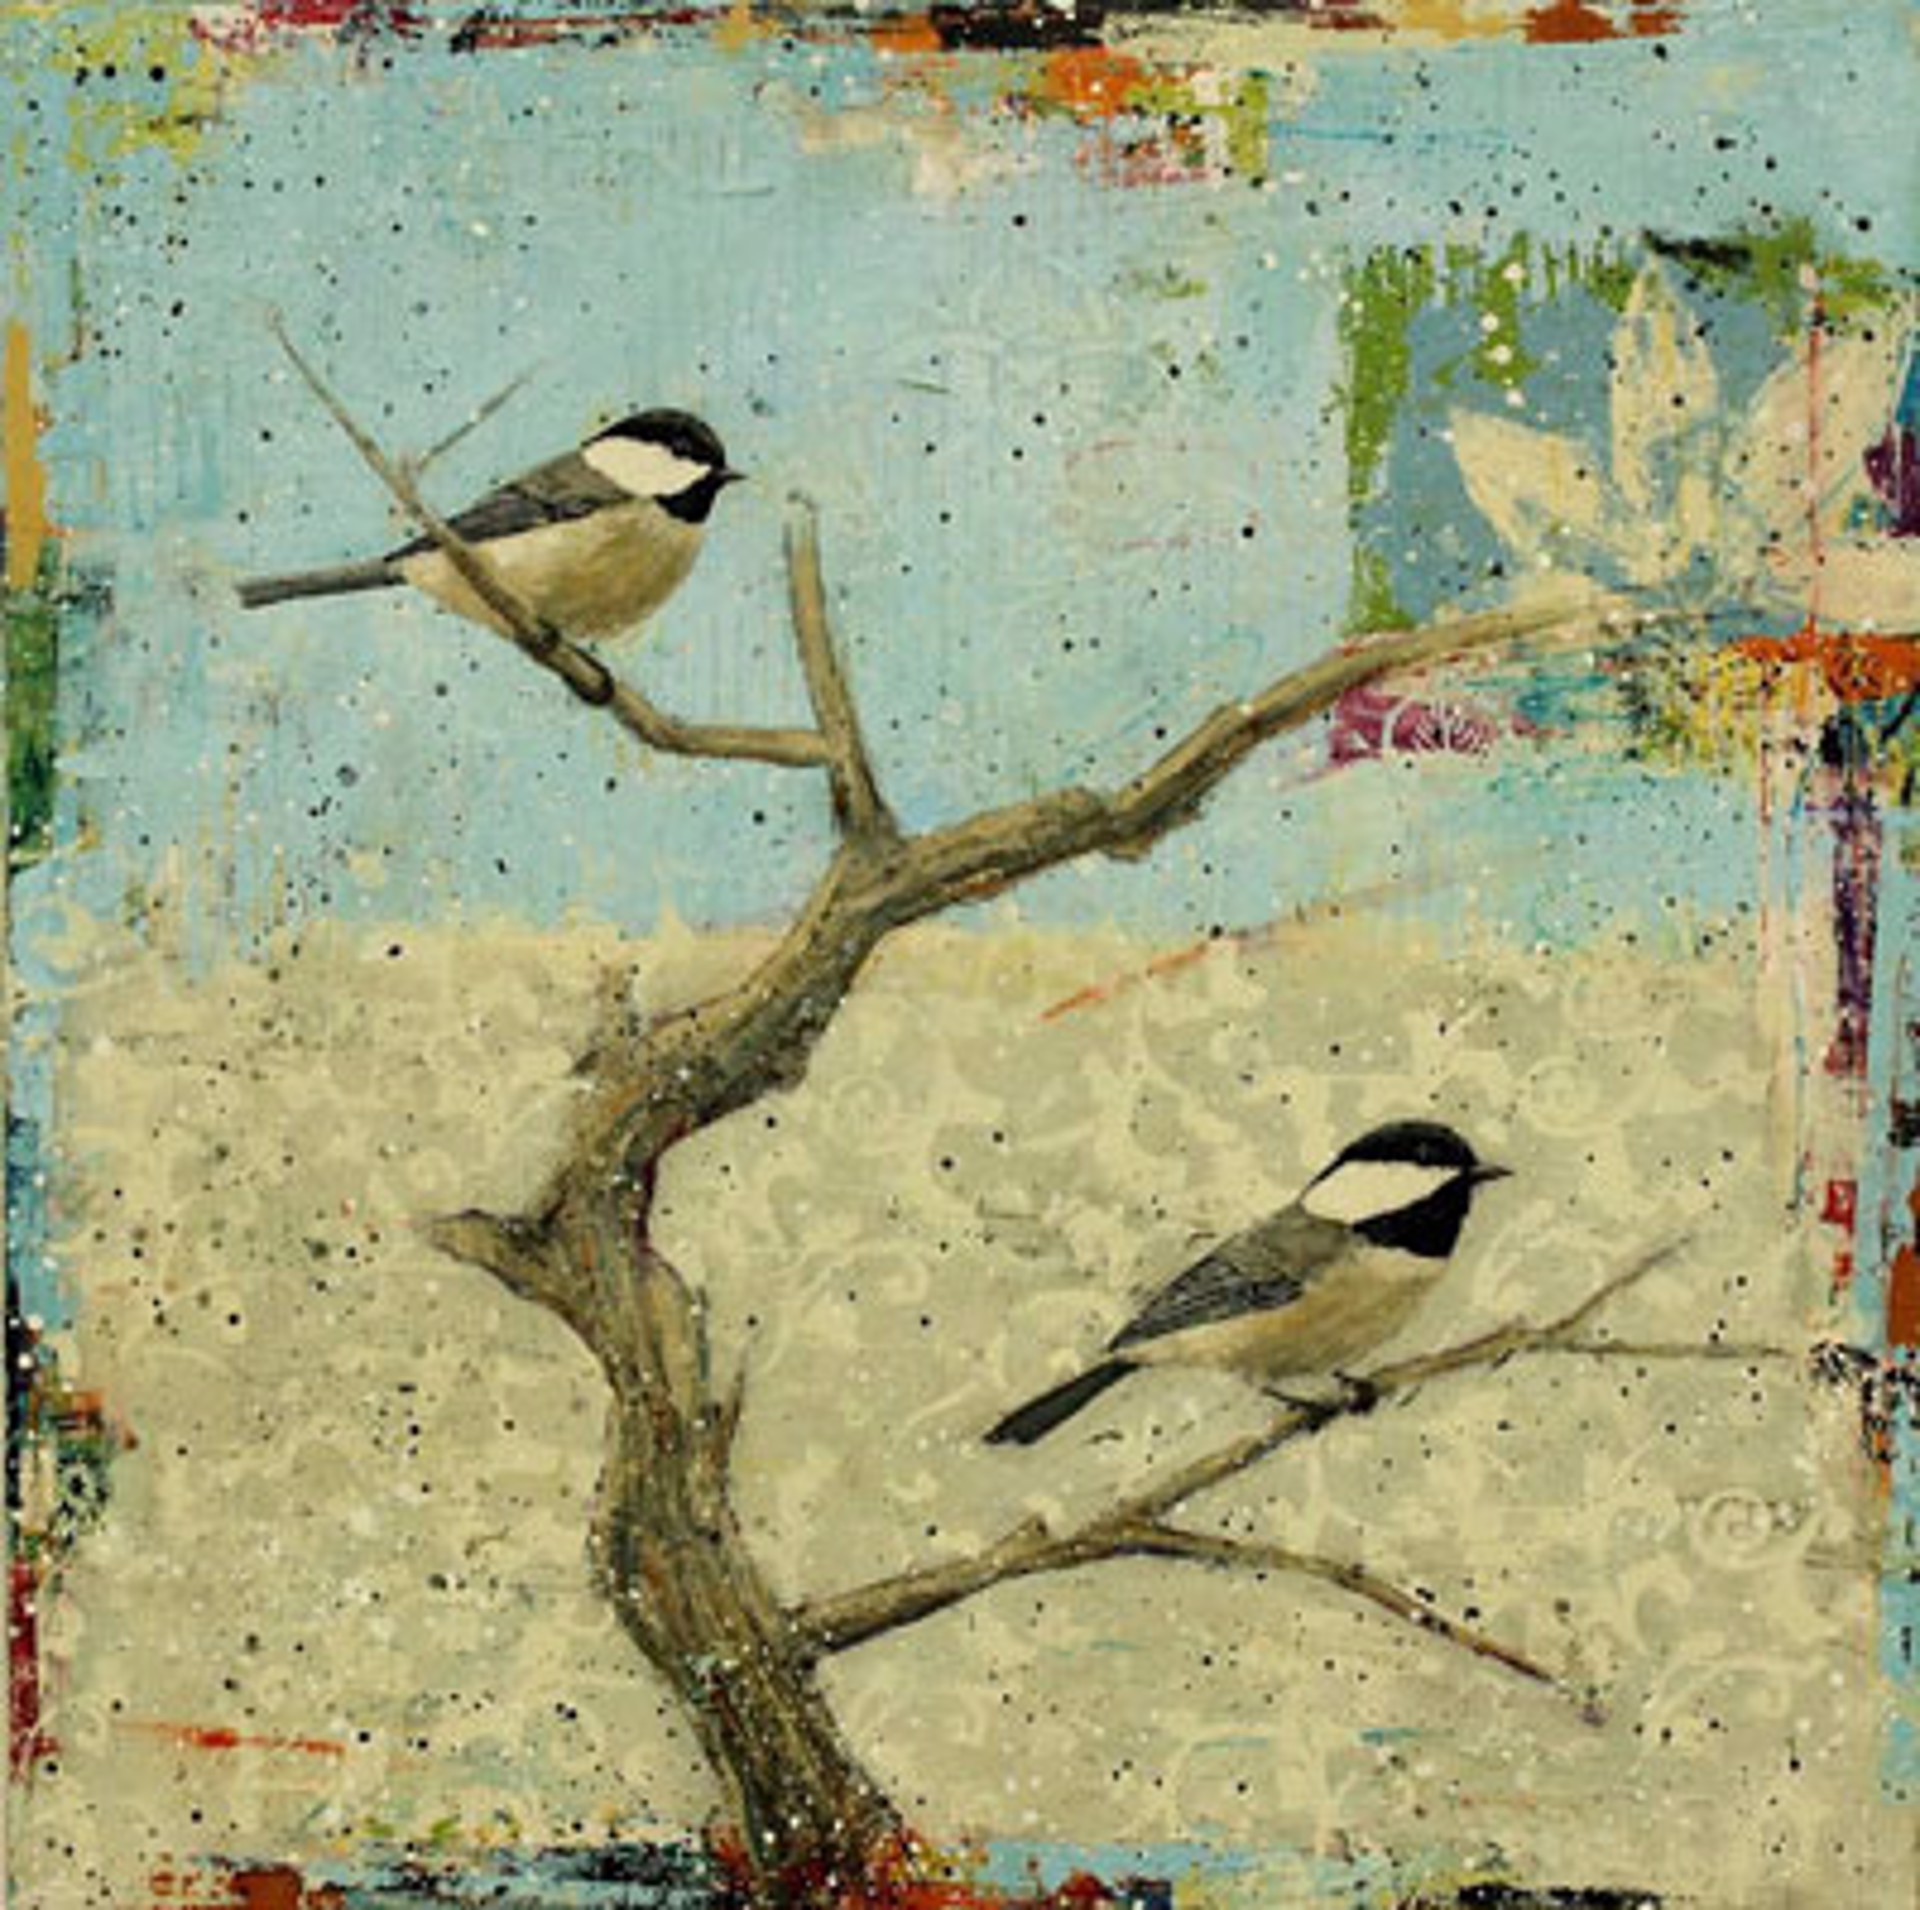 Black Capped Chickadees #12 by Paul Brigham